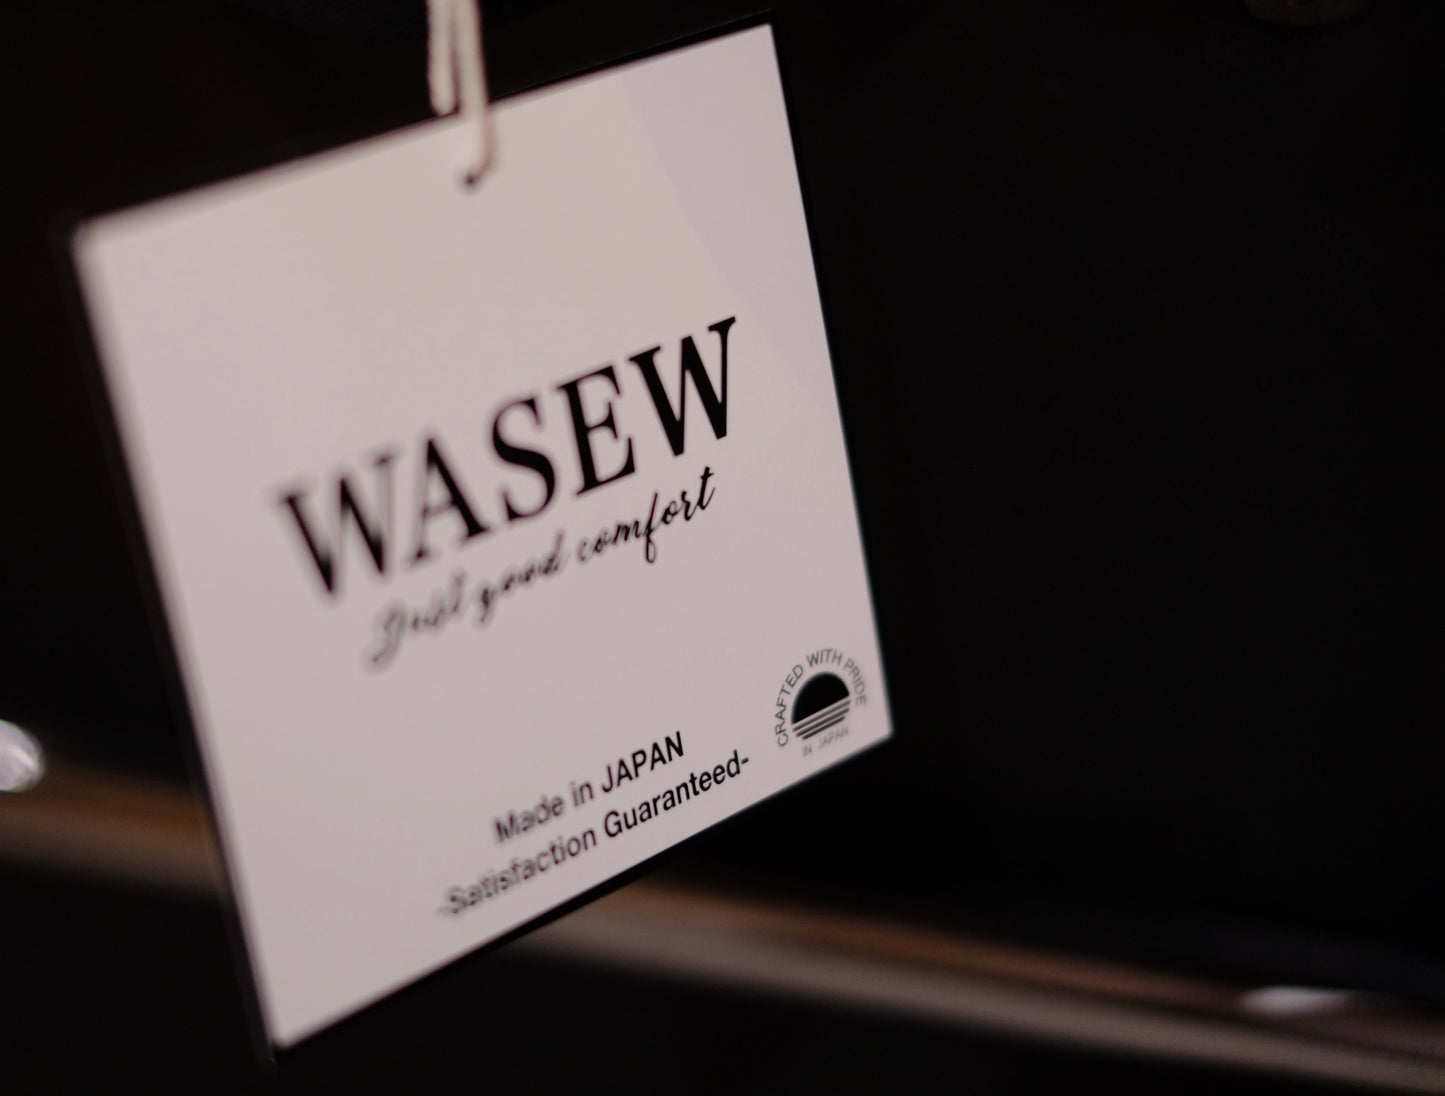 24SS WASEW / ワソー "GAB-A-JEAN”